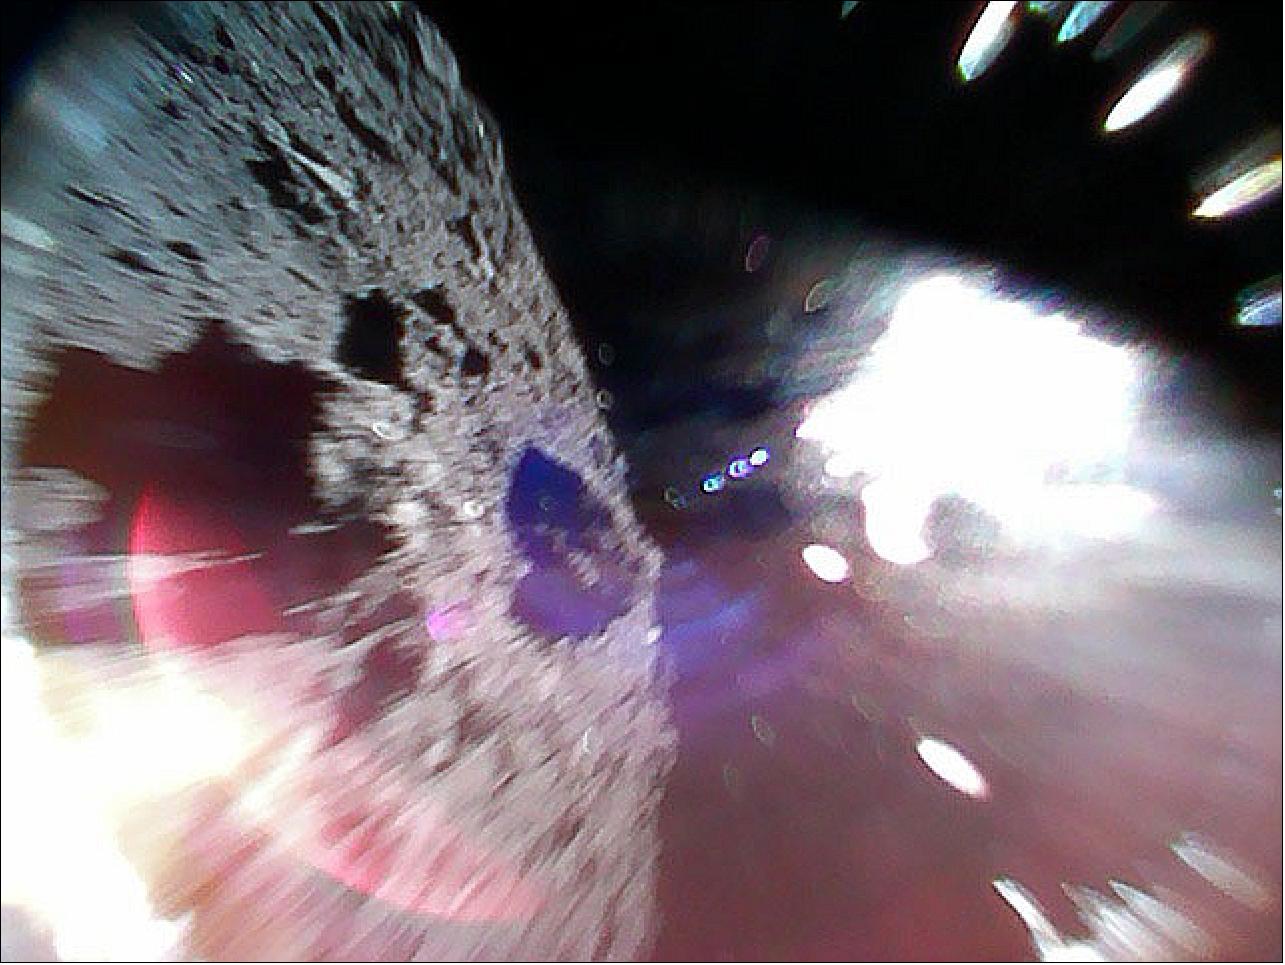 Figure 95: Image captured by Rover-1A on September 22 at around 11:44 JST. Color image captured while moving (during a hop) on the surface of Ryugu. The left-half of the image is the asteroid surface. The bright white region is due to sunlight (image credit: JAXA)